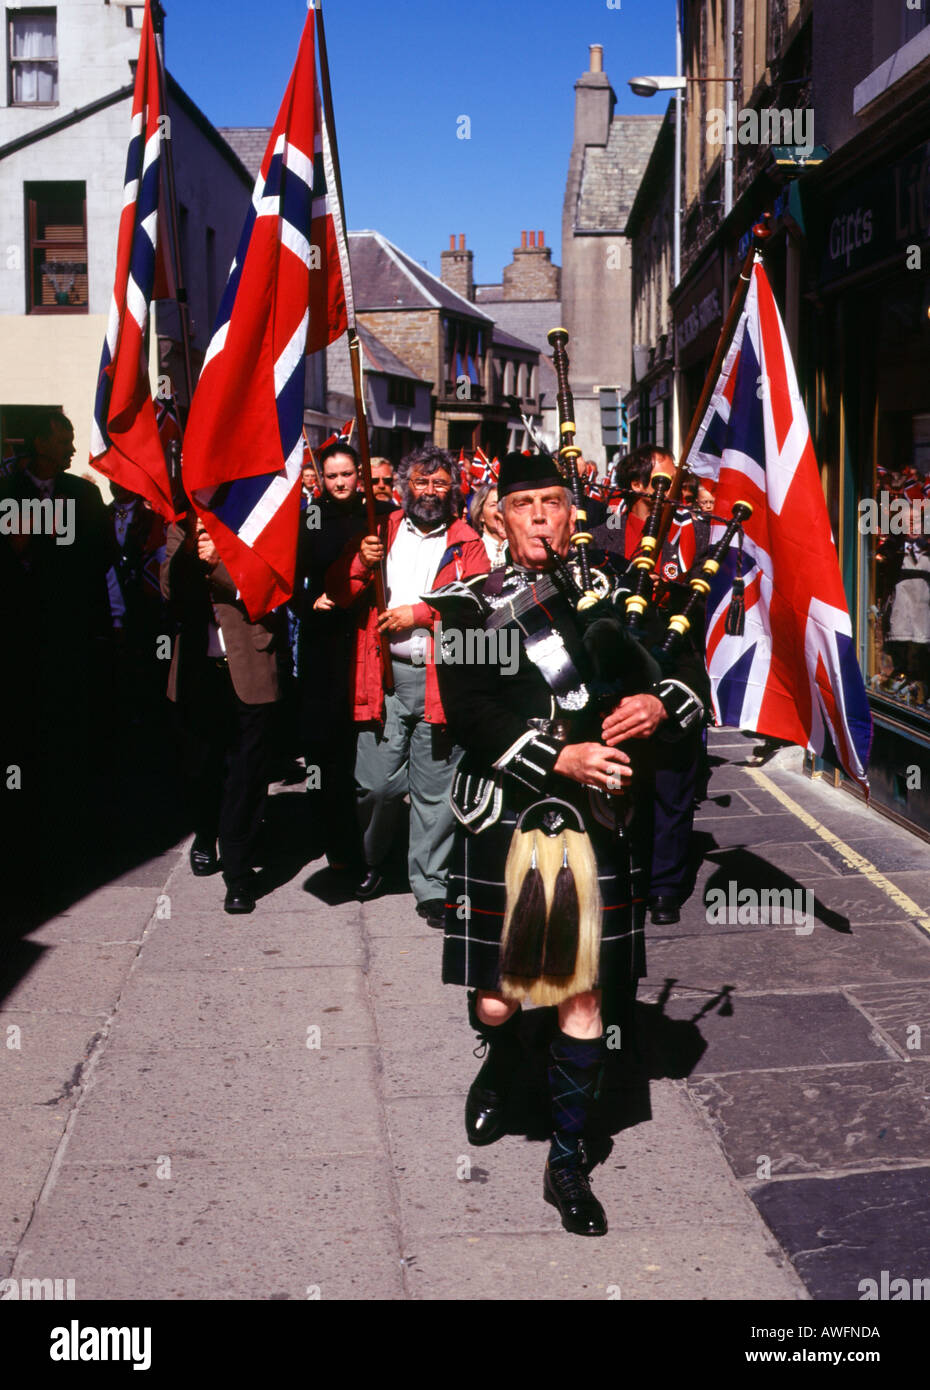 dh Norwegian Constitution Day KIRKWALL ORKNEY Bagpiper leading street parade Albert street Flags procession piper scottish national dress Stock Photo